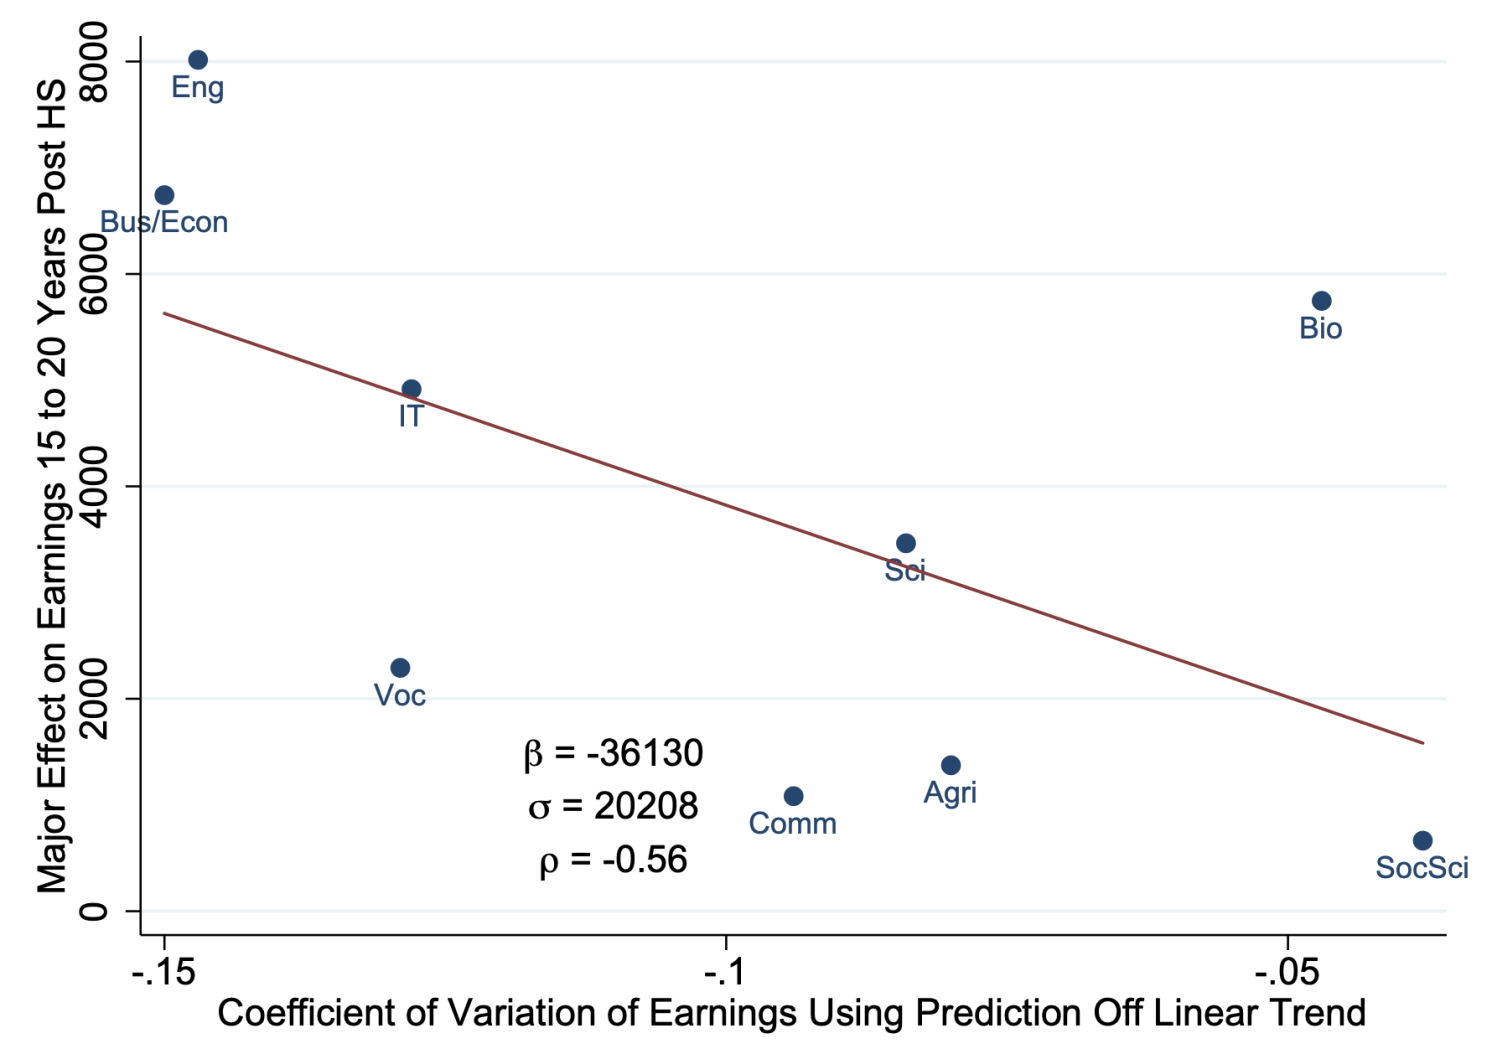 Figure 3 Relationship between mean returns and variability in earnings by major